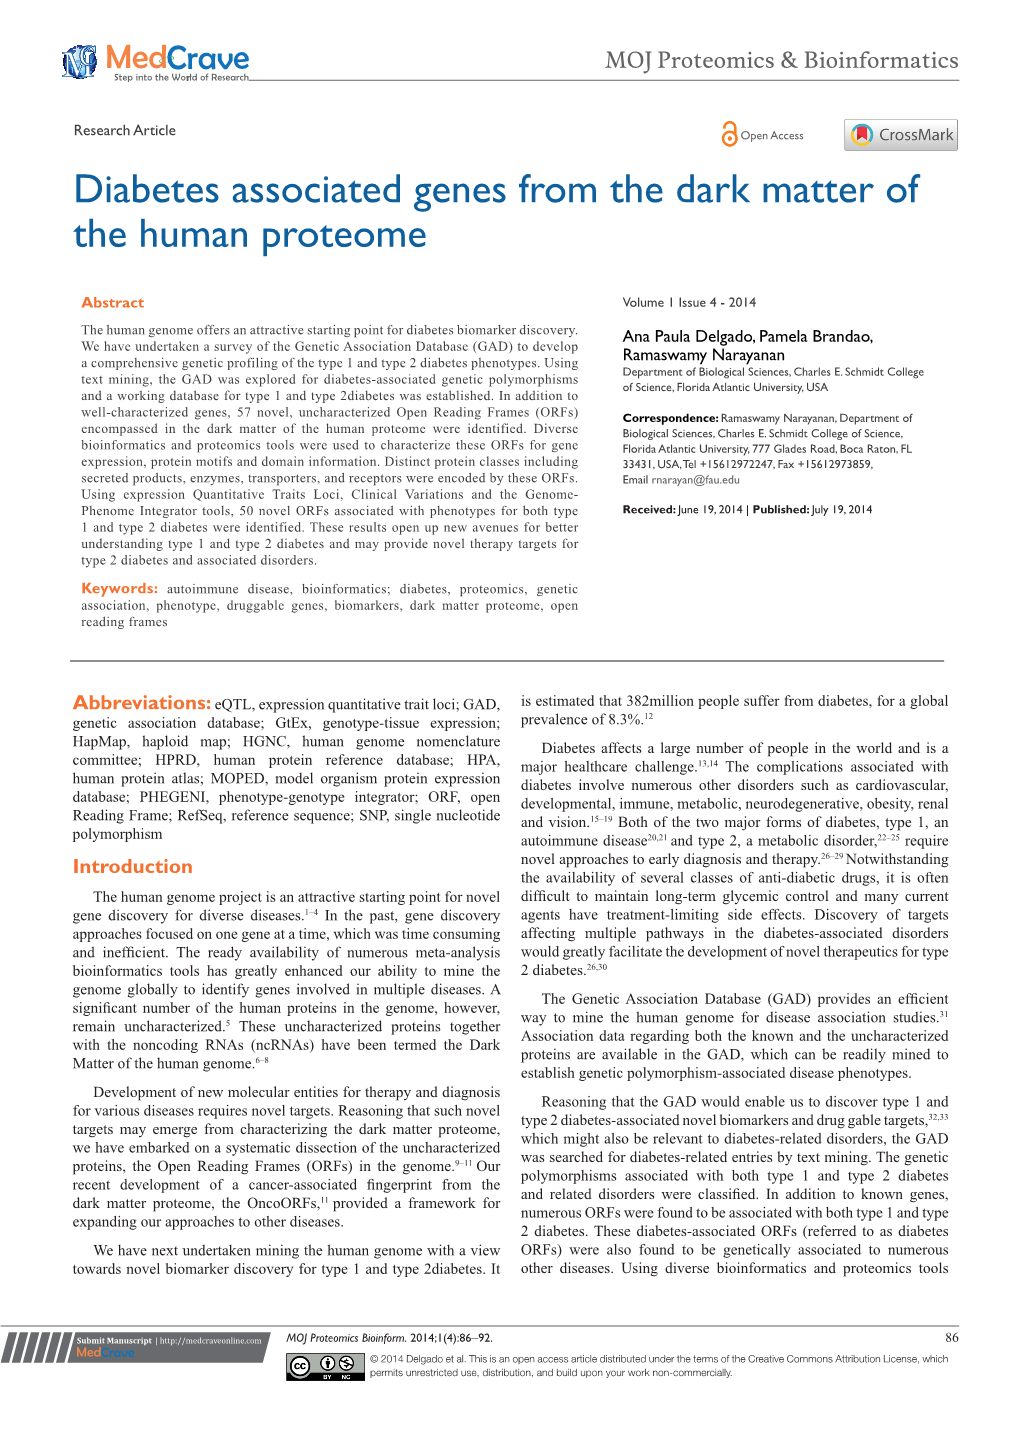 Diabetes Associated Genes from the Dark Matter of the Human Proteome